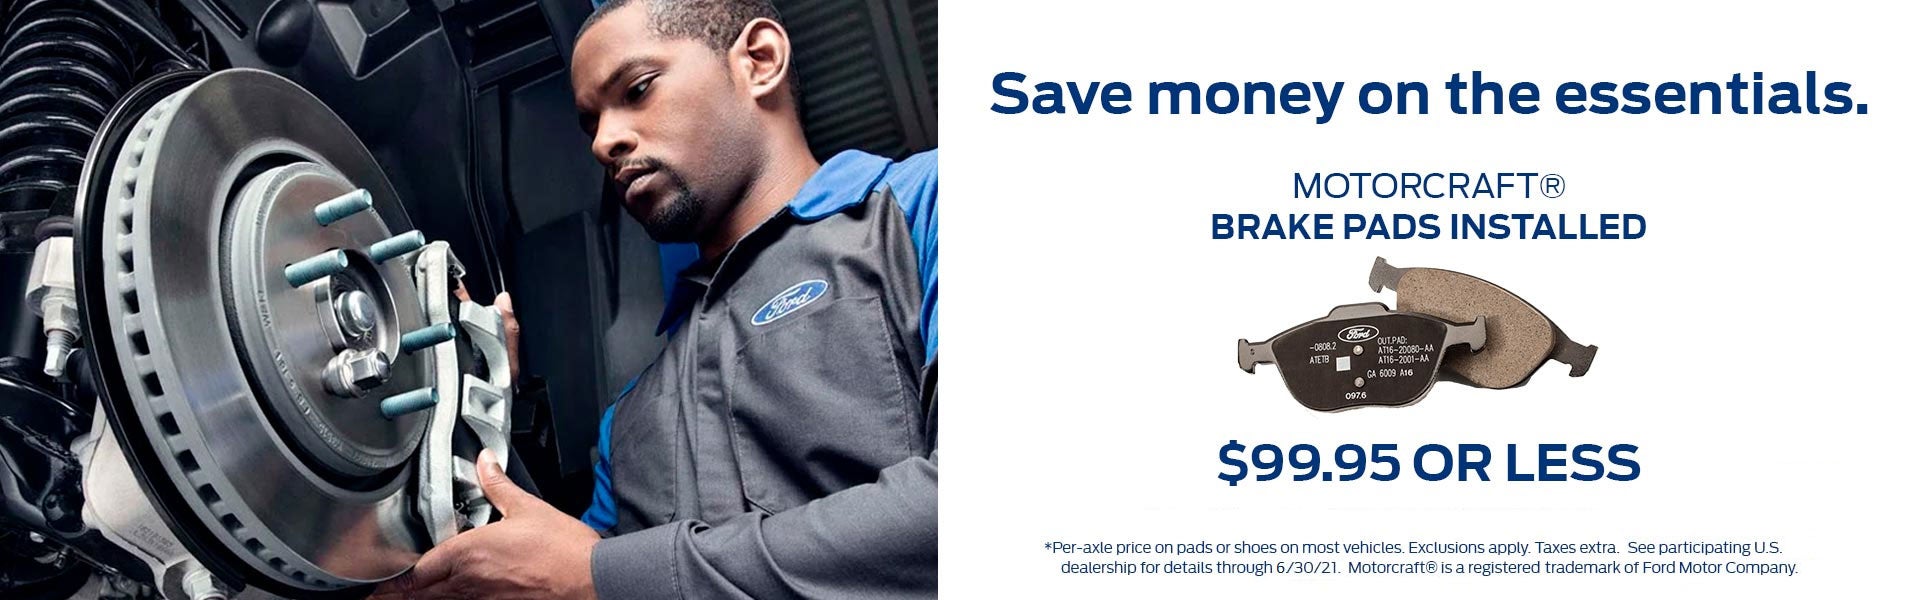 Save money on the essentials. Get Motorcraft® Brake Pads installed, $99.95 or less. Per-axle price on pads or shoes on most vehicles. Exclusions apply. Taxes extra. Motorcraft® is a registered trademark of Ford Motor Company. See participating U.S. dealership for details through 12/31/20. Click to print this offer.